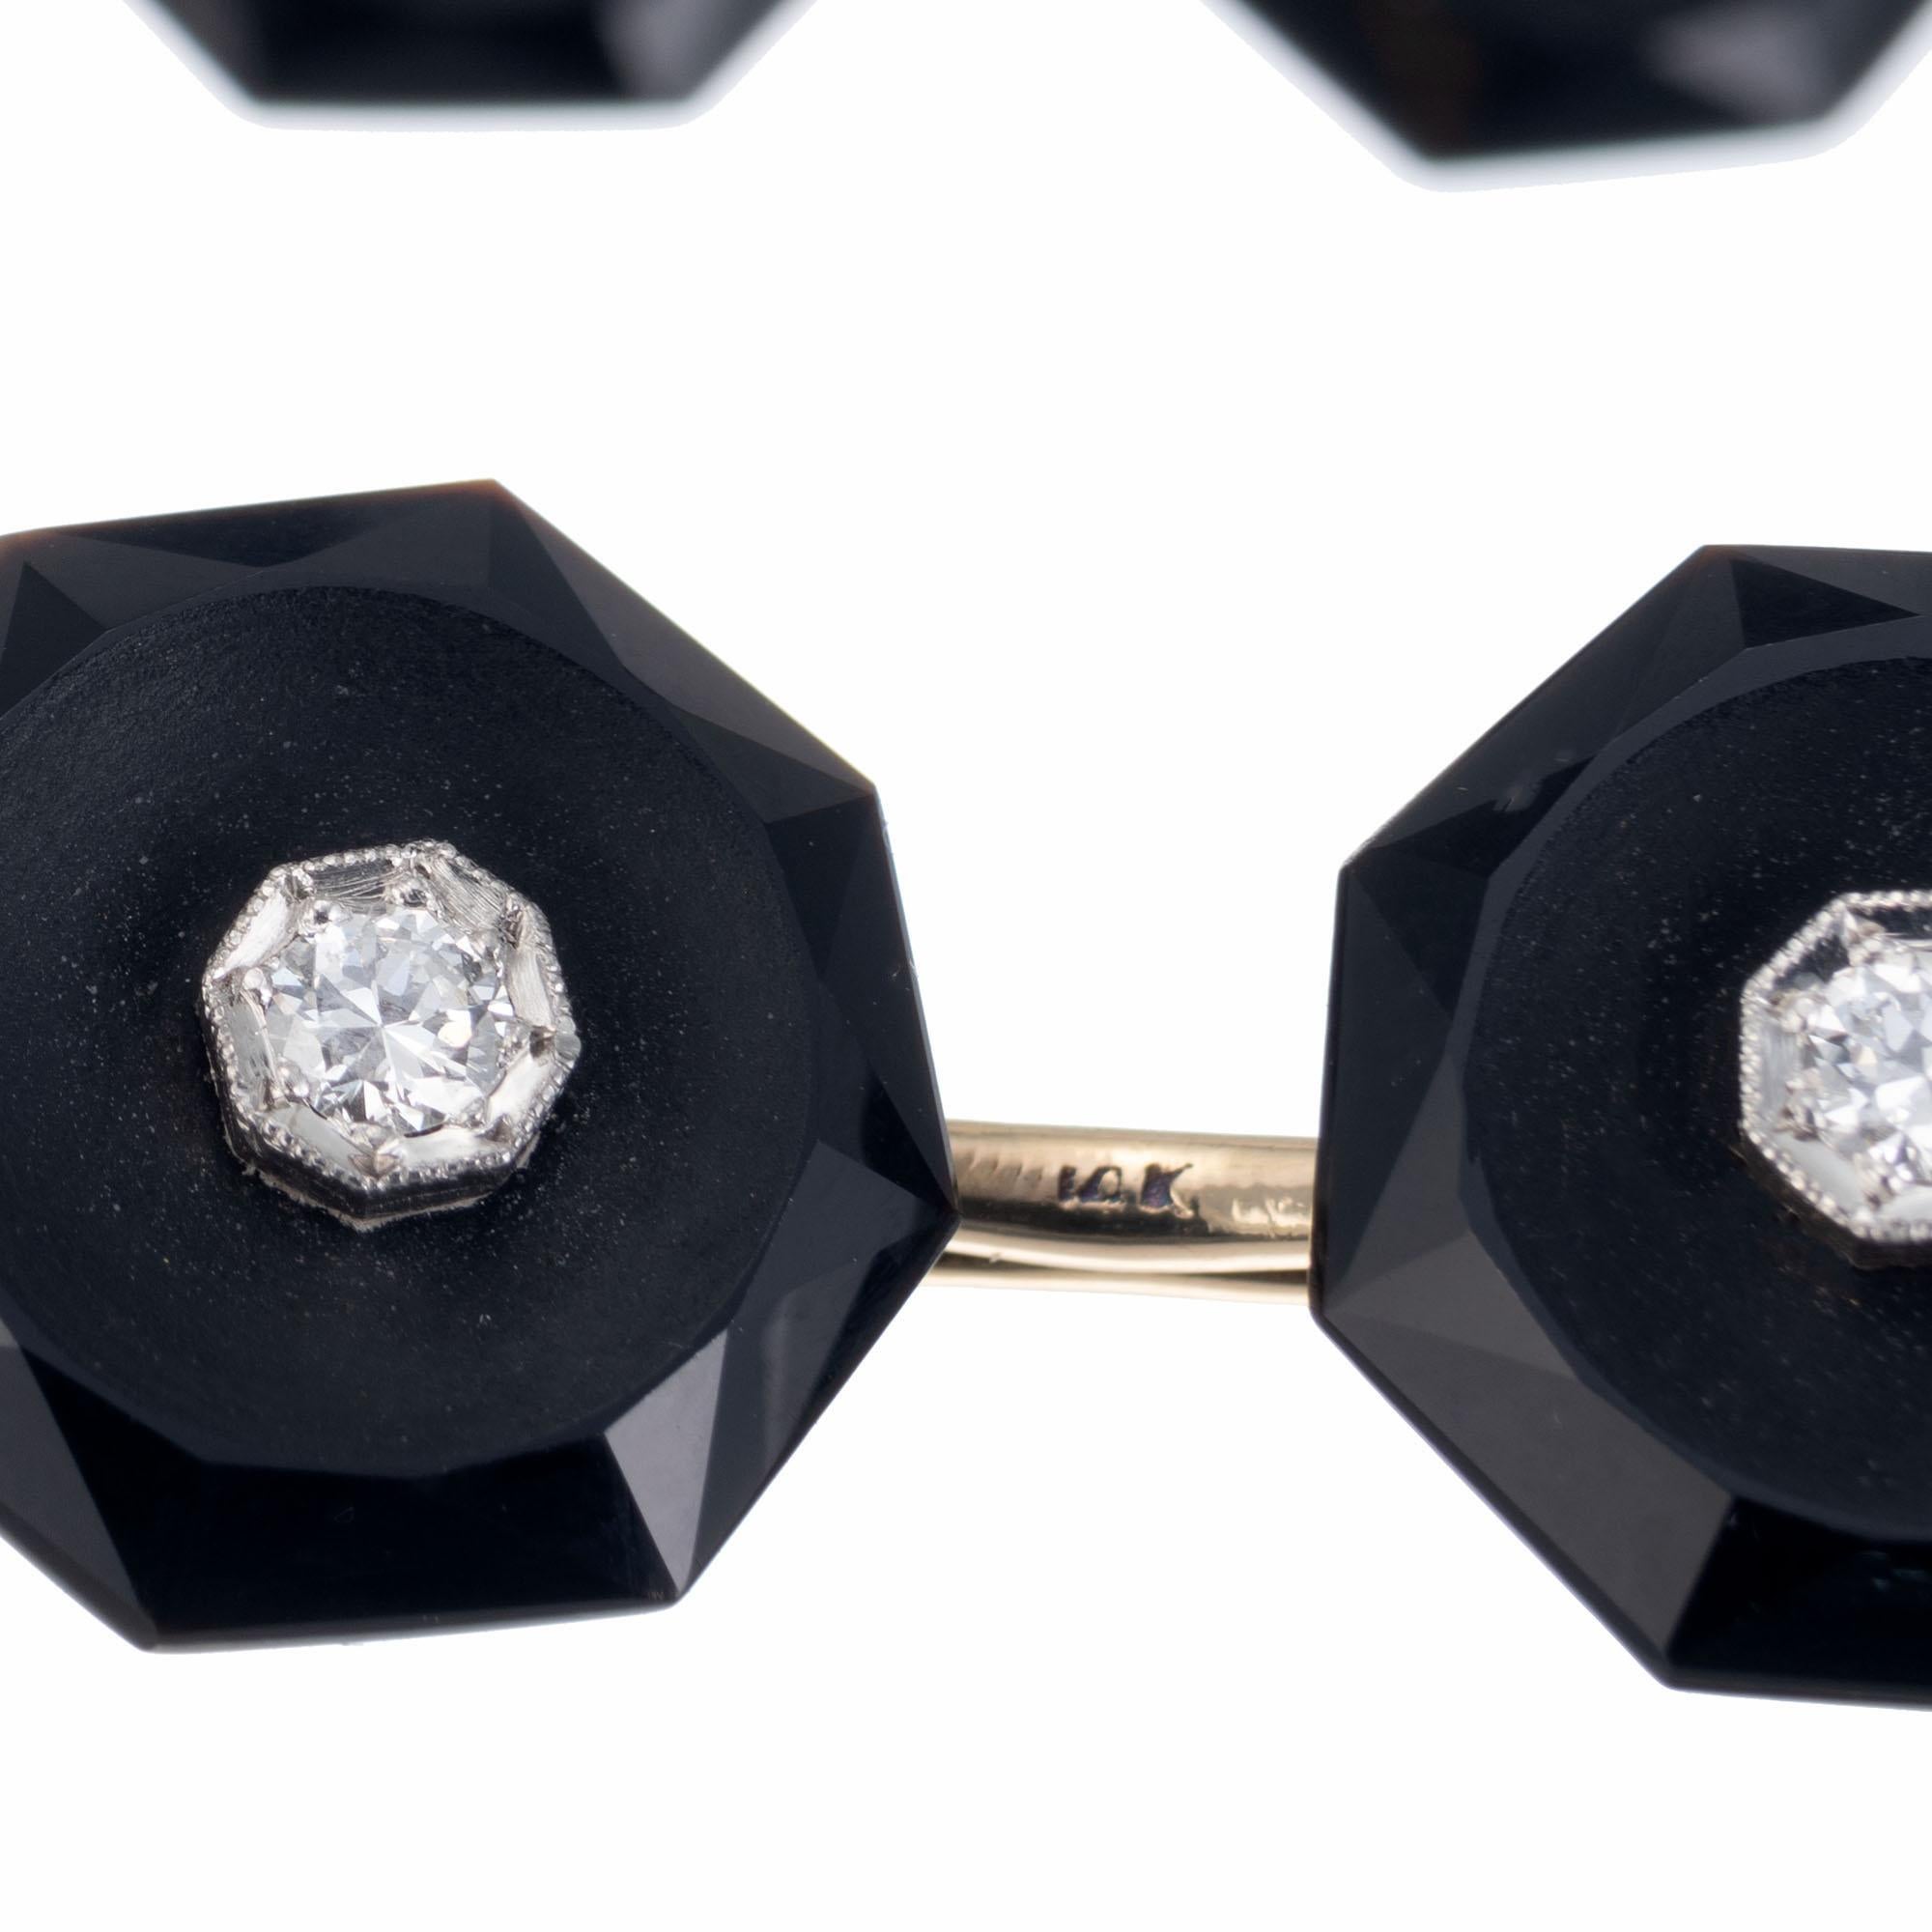 Art Deco Two double sided cufflinks and four shirt stud set circa 1920's. Black onyx octagons with 14k white gold diamond centers. 14k Yellow gold backs. Slight nick to the onyx on one shirt stud 

8 octagonal facet onyx 
8 round brilliant cut